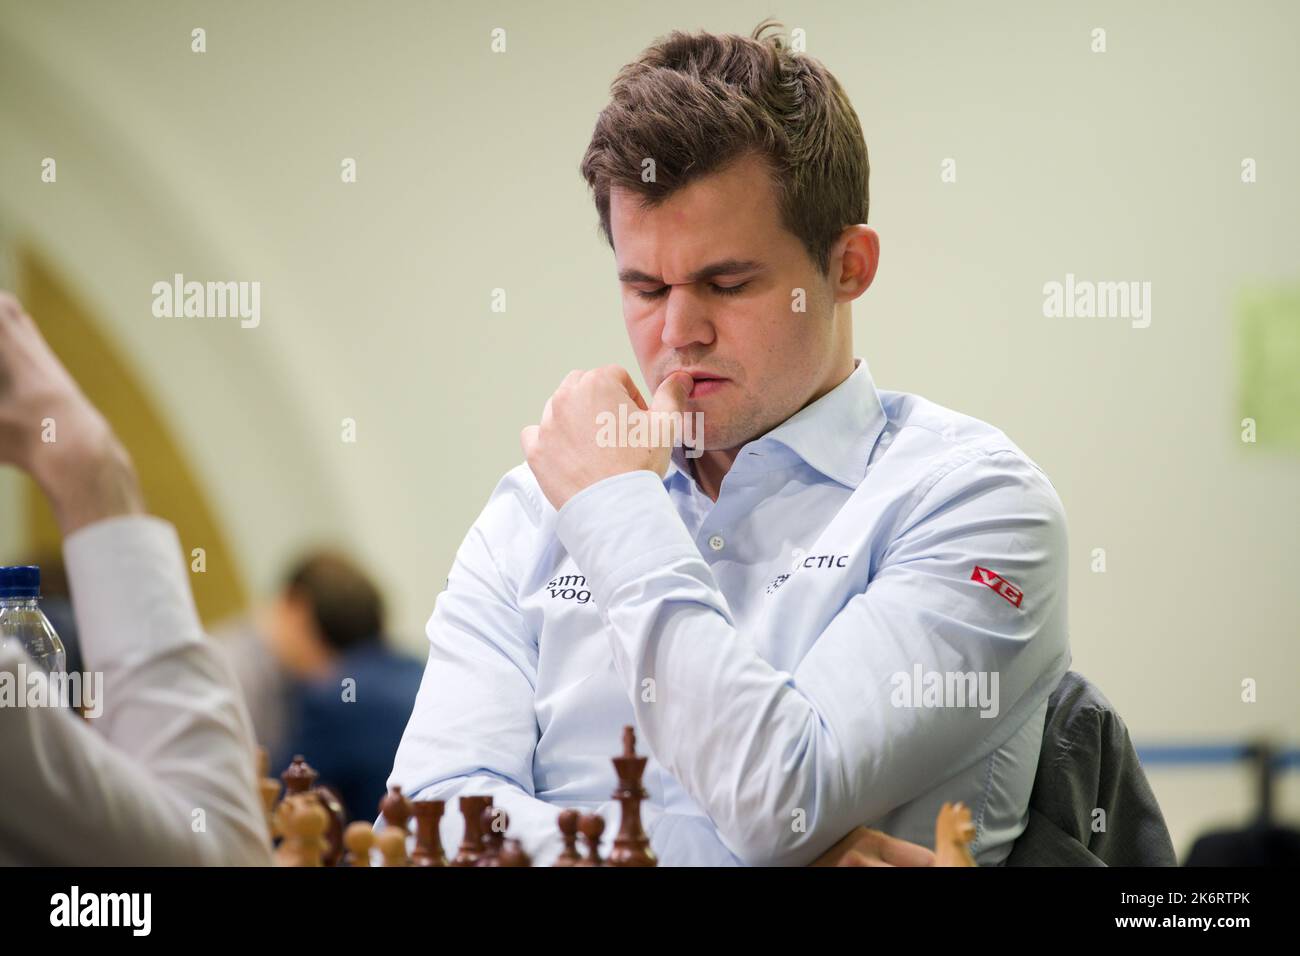 2018-CARLSEN-VS.-CARUANA - Play Chess with Friends